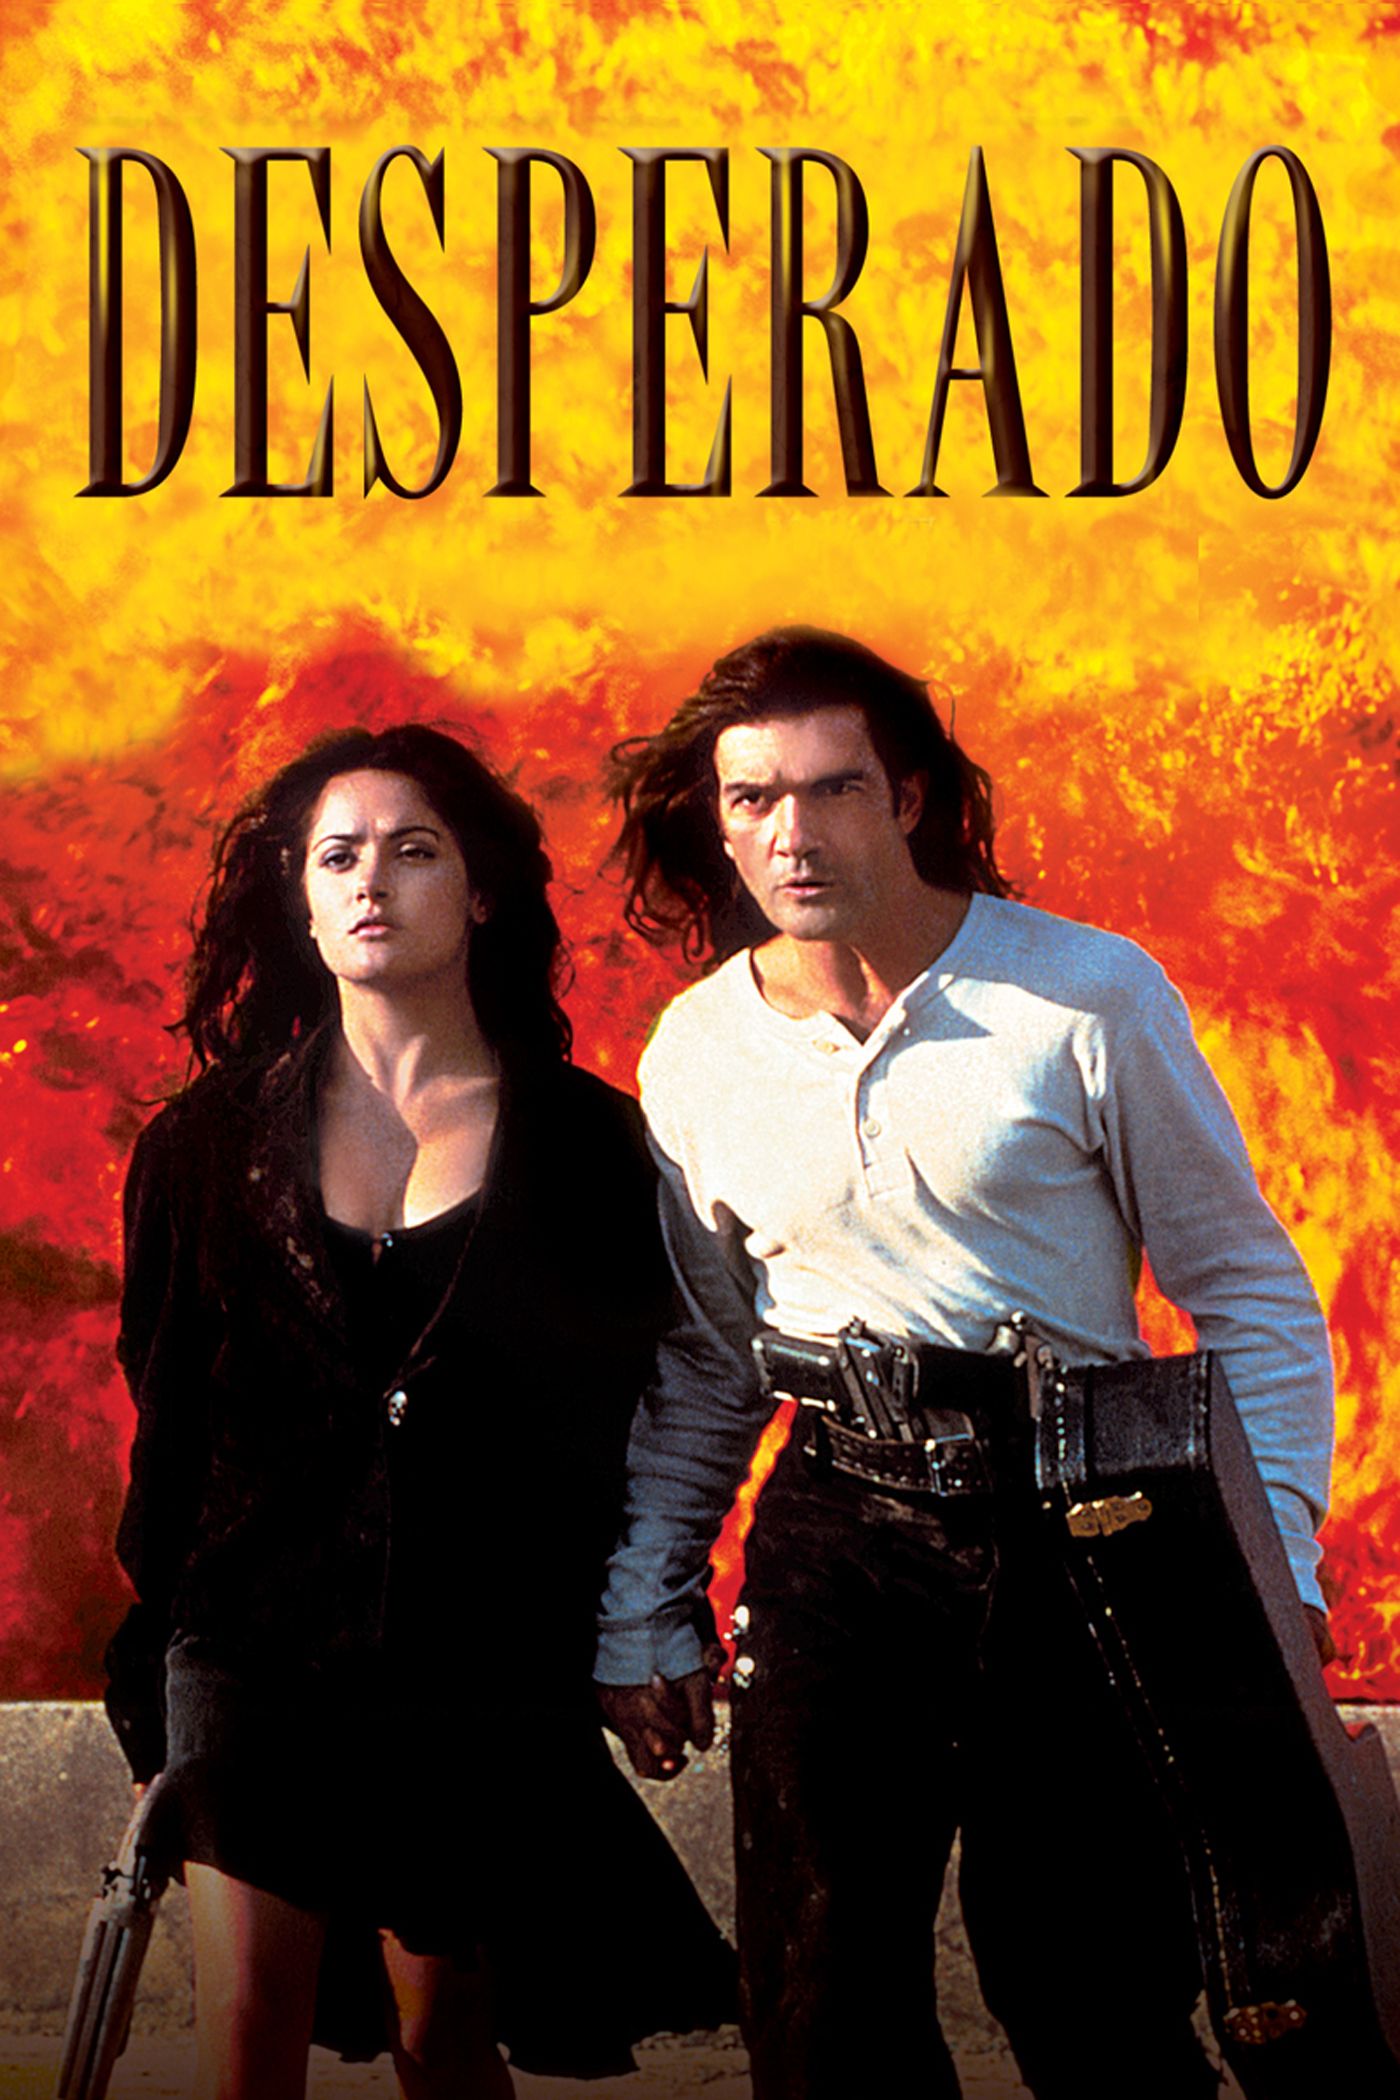 Antonio Banderas and Salma Hayek in a scene from the film News